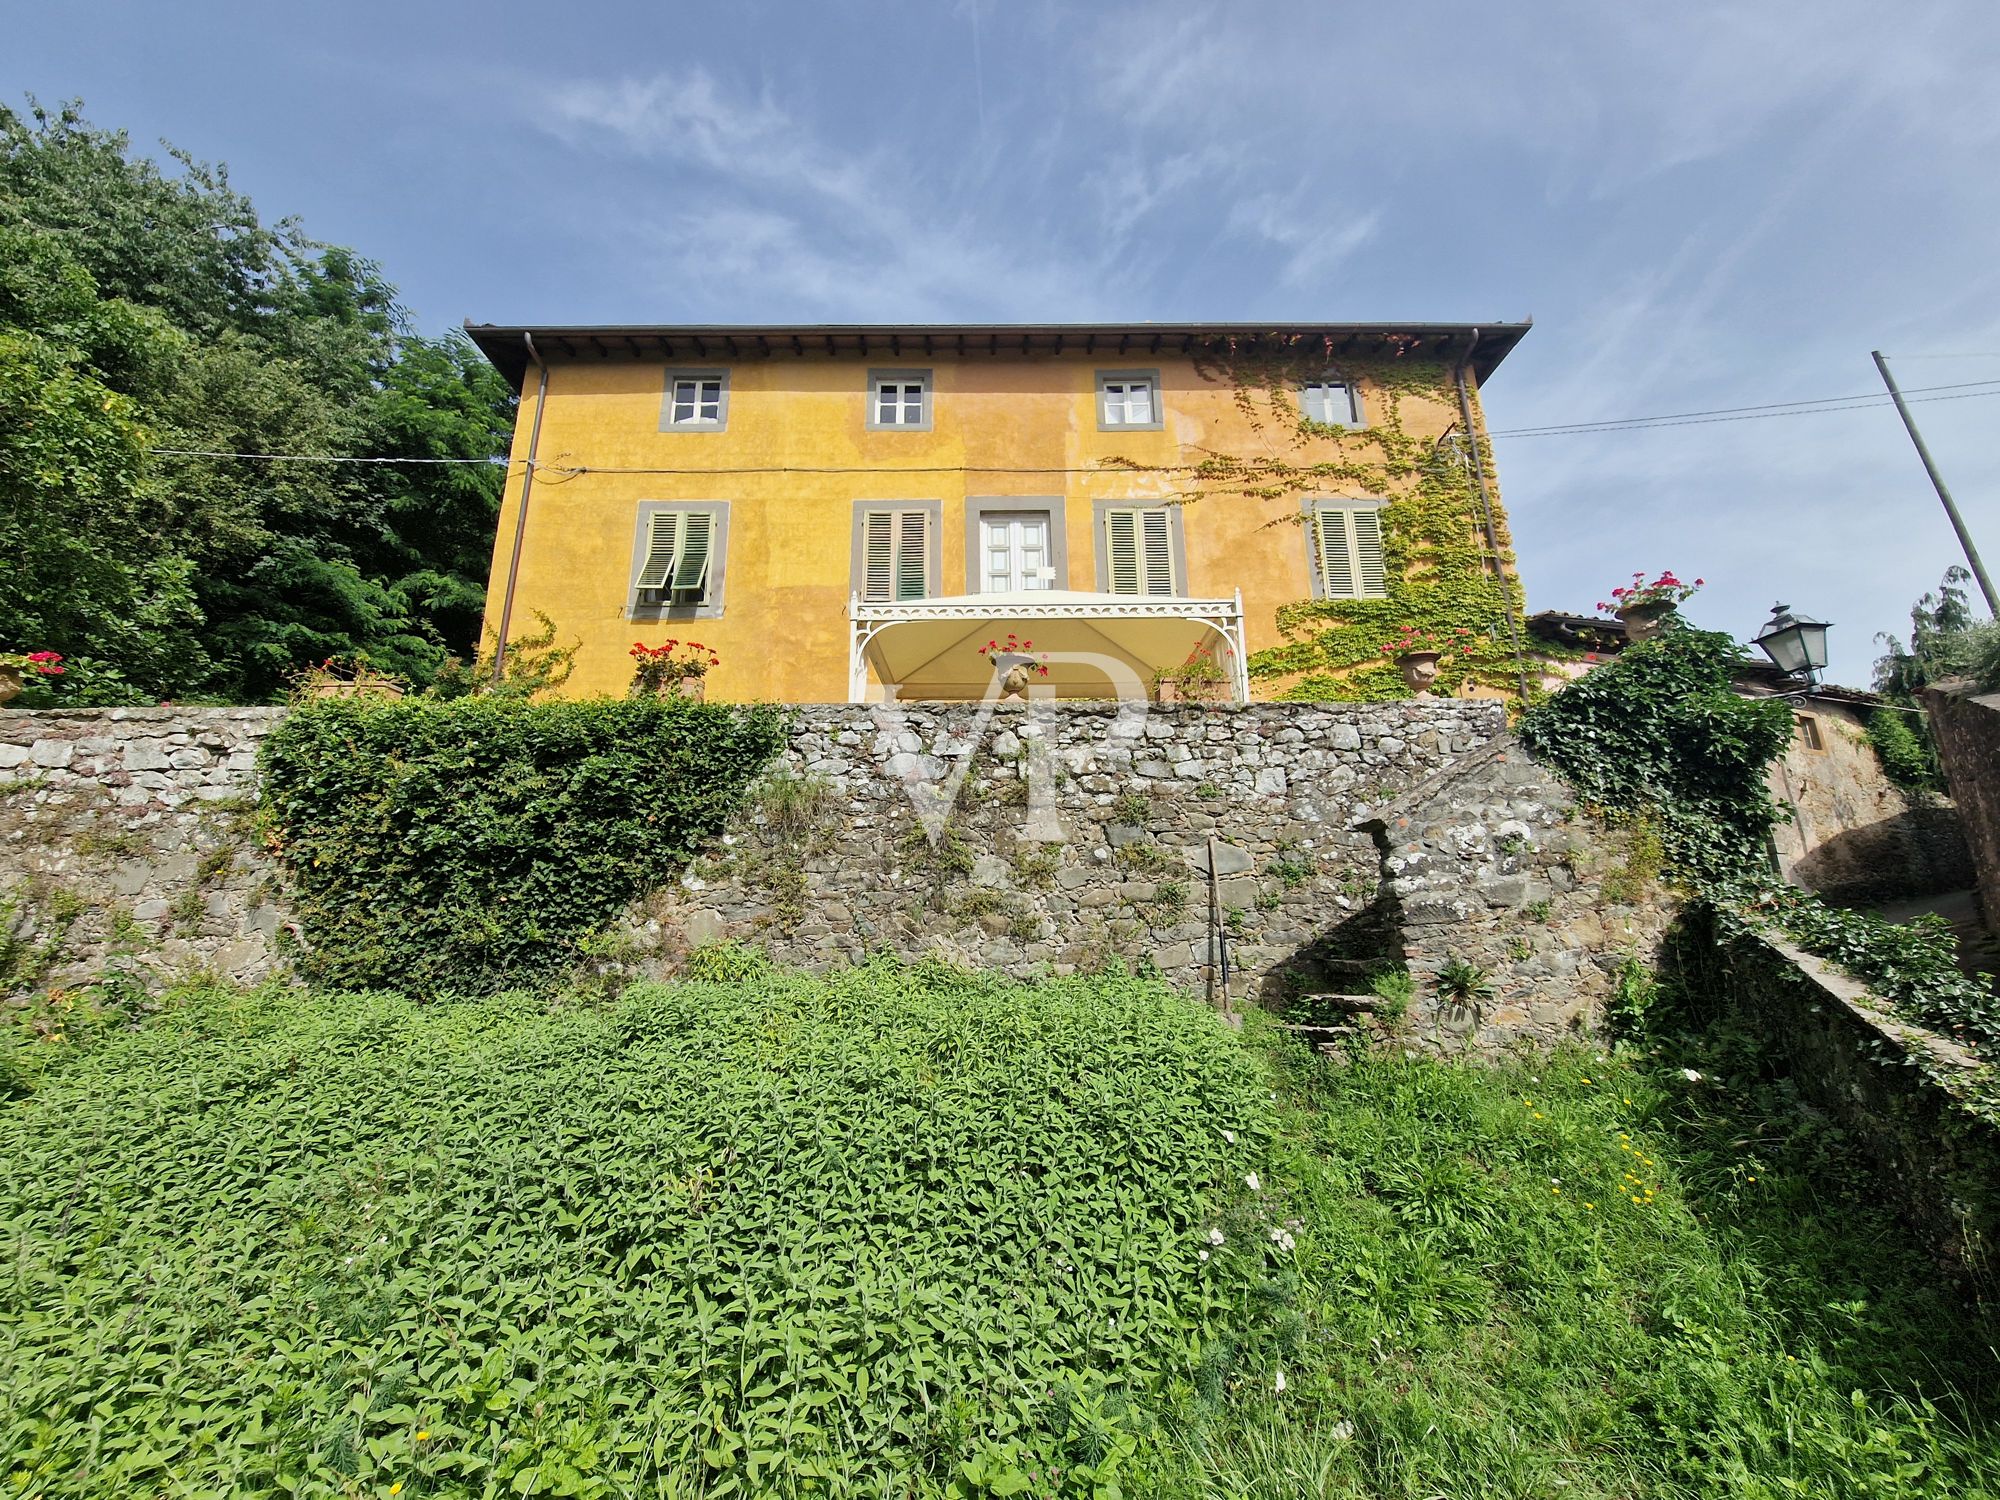 Tereglio Palace - old-fashioned style with great potential